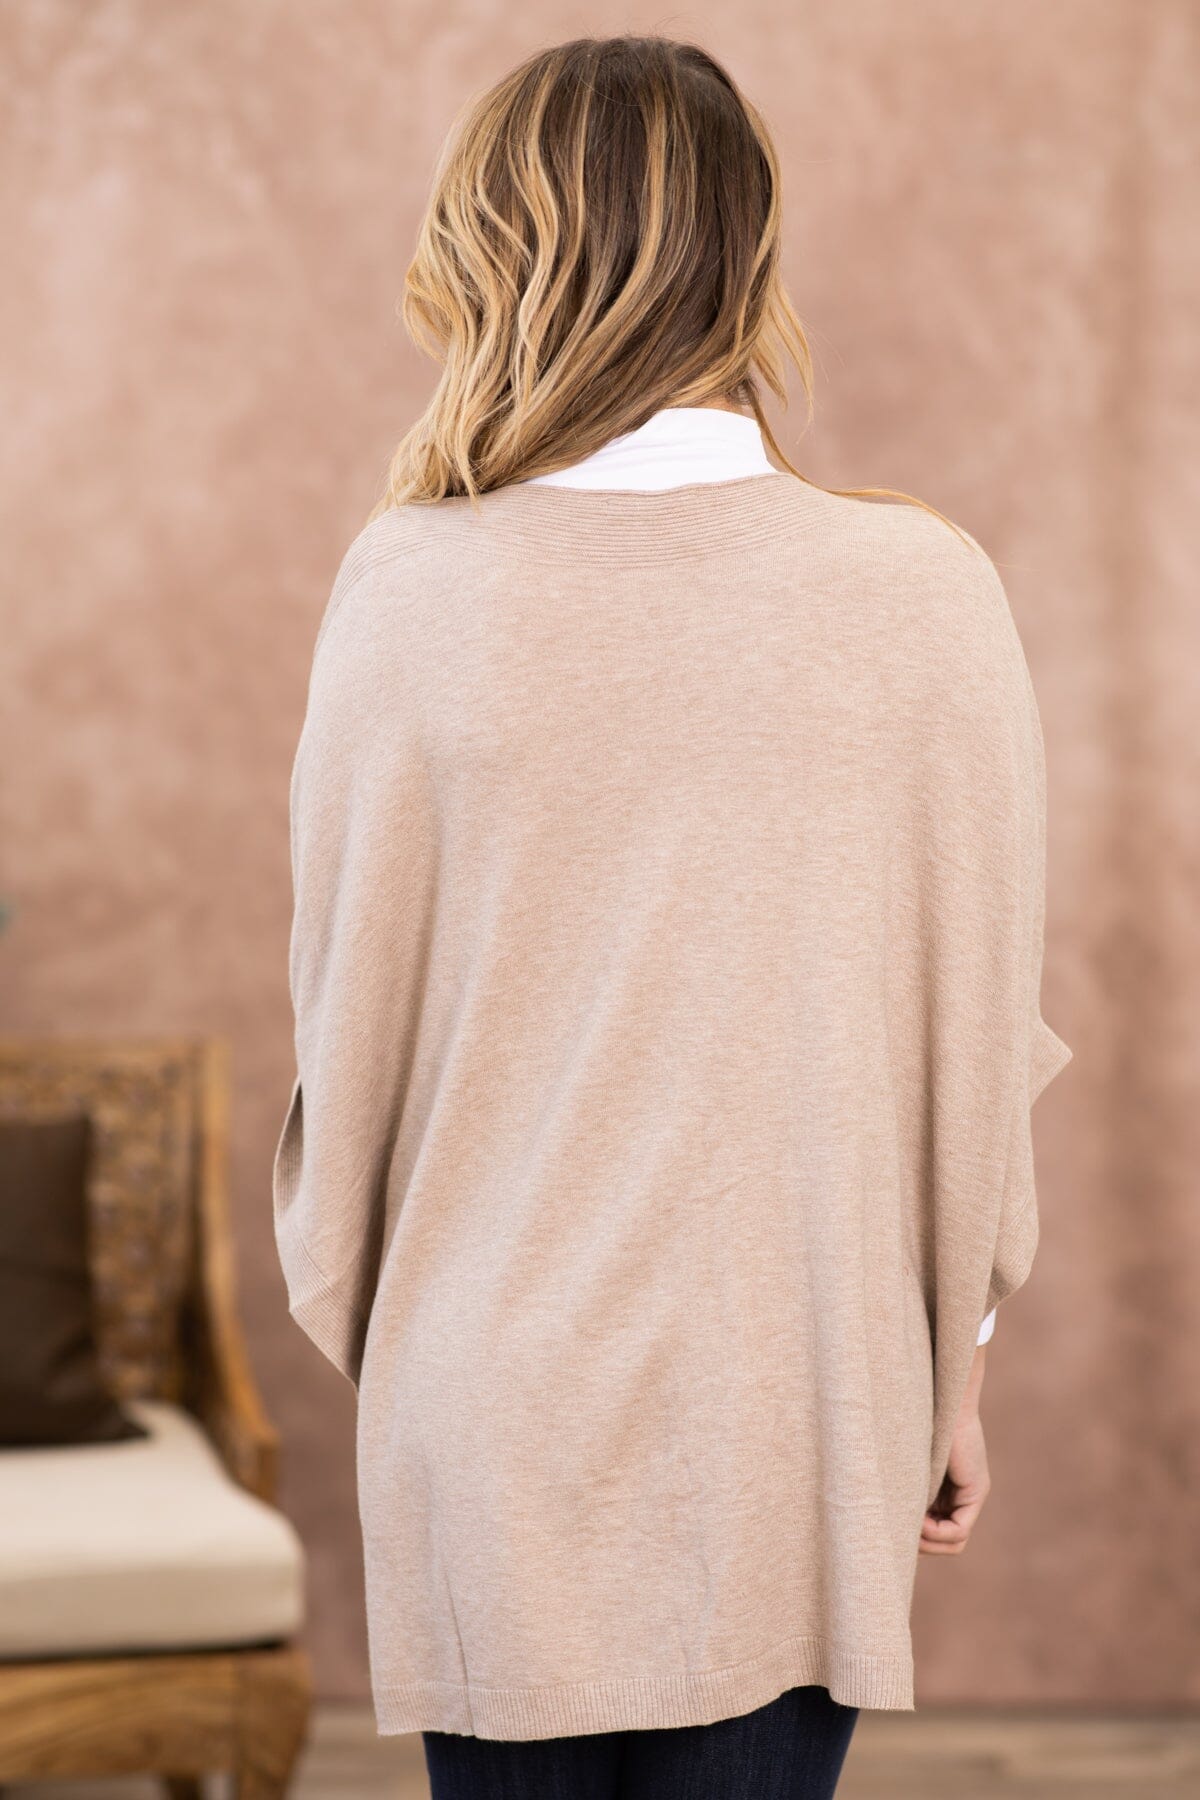 Tan and Gold Scattered Studs Sweater - Filly Flair